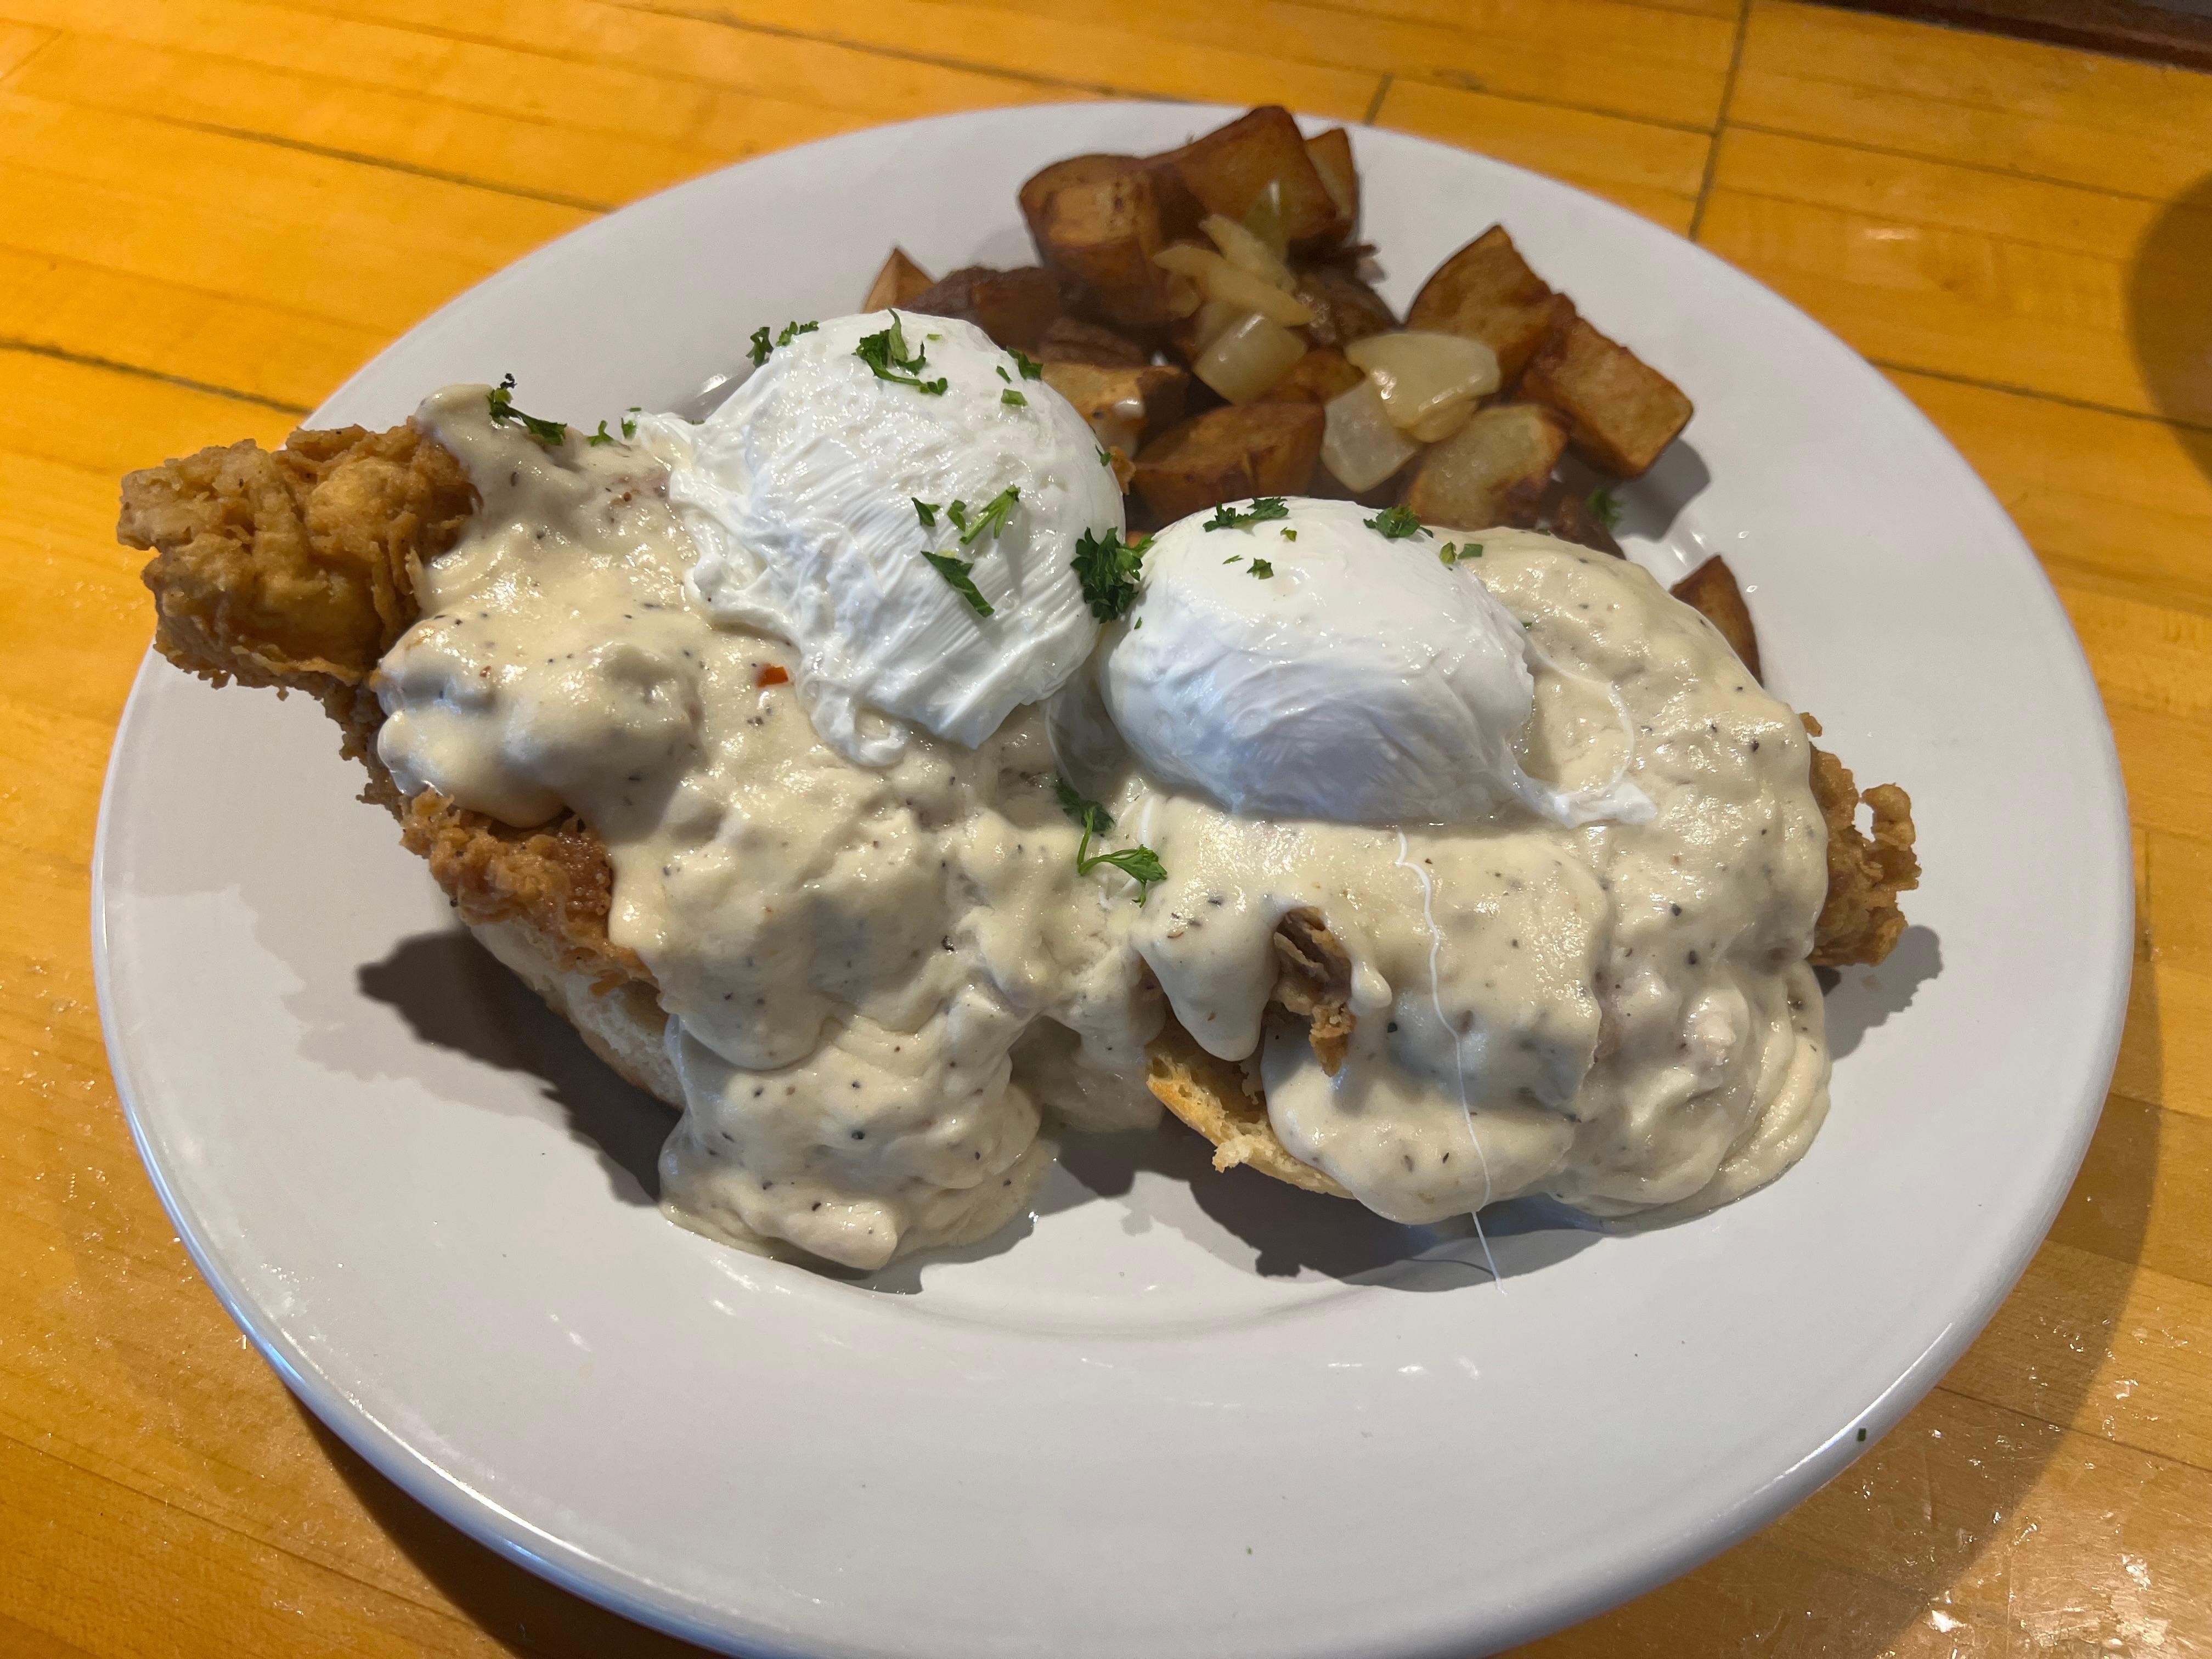 SOUTHERN CHICKEN BENEDICT